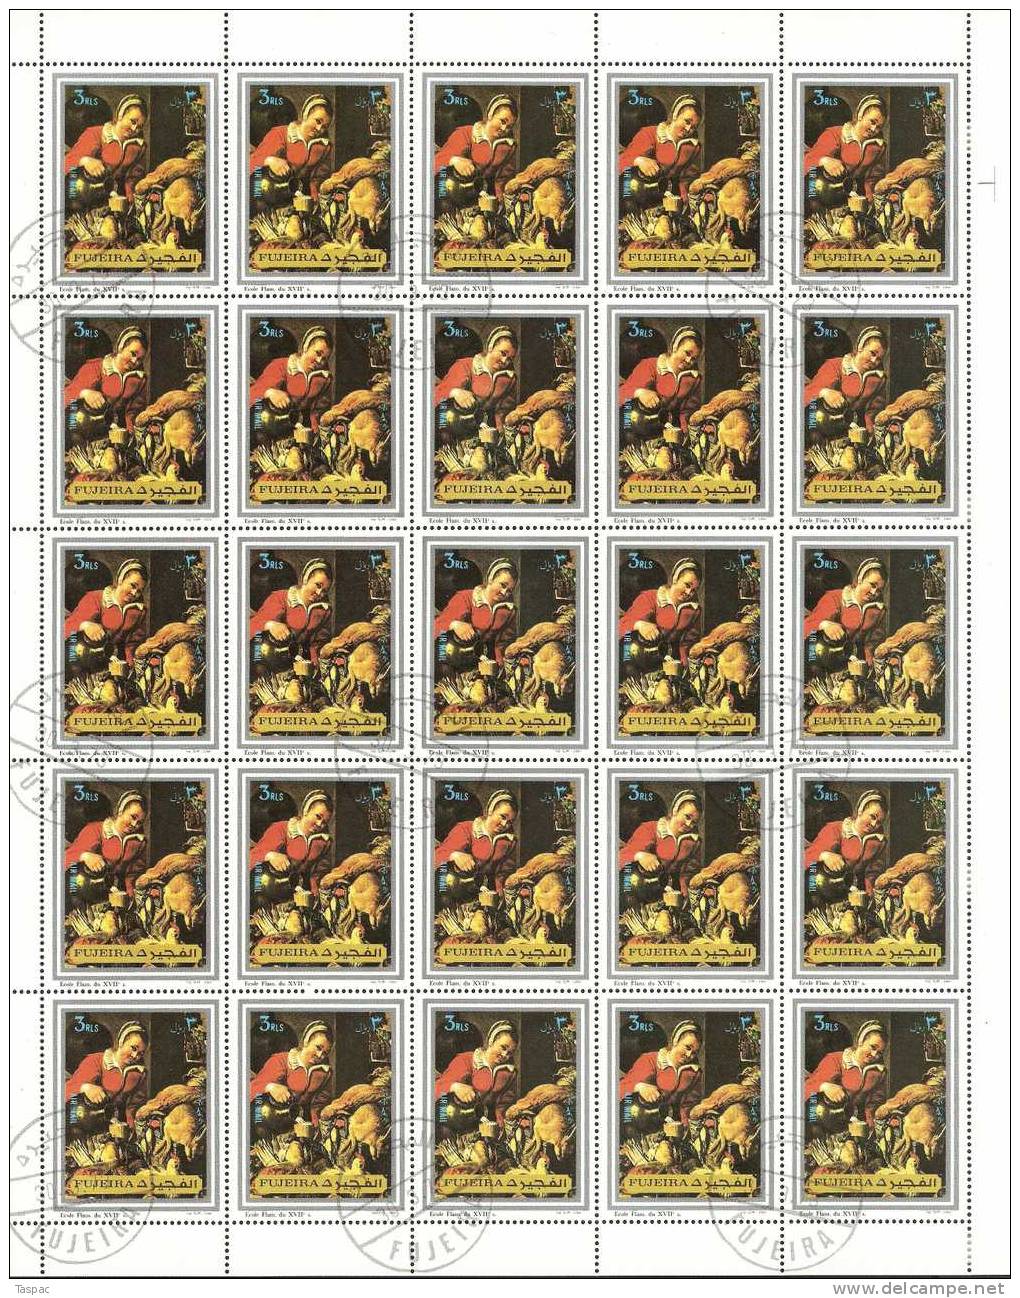 Fujeira 1972 Mi# 1362-1369 A Used - Sheets of  25 - Paintings